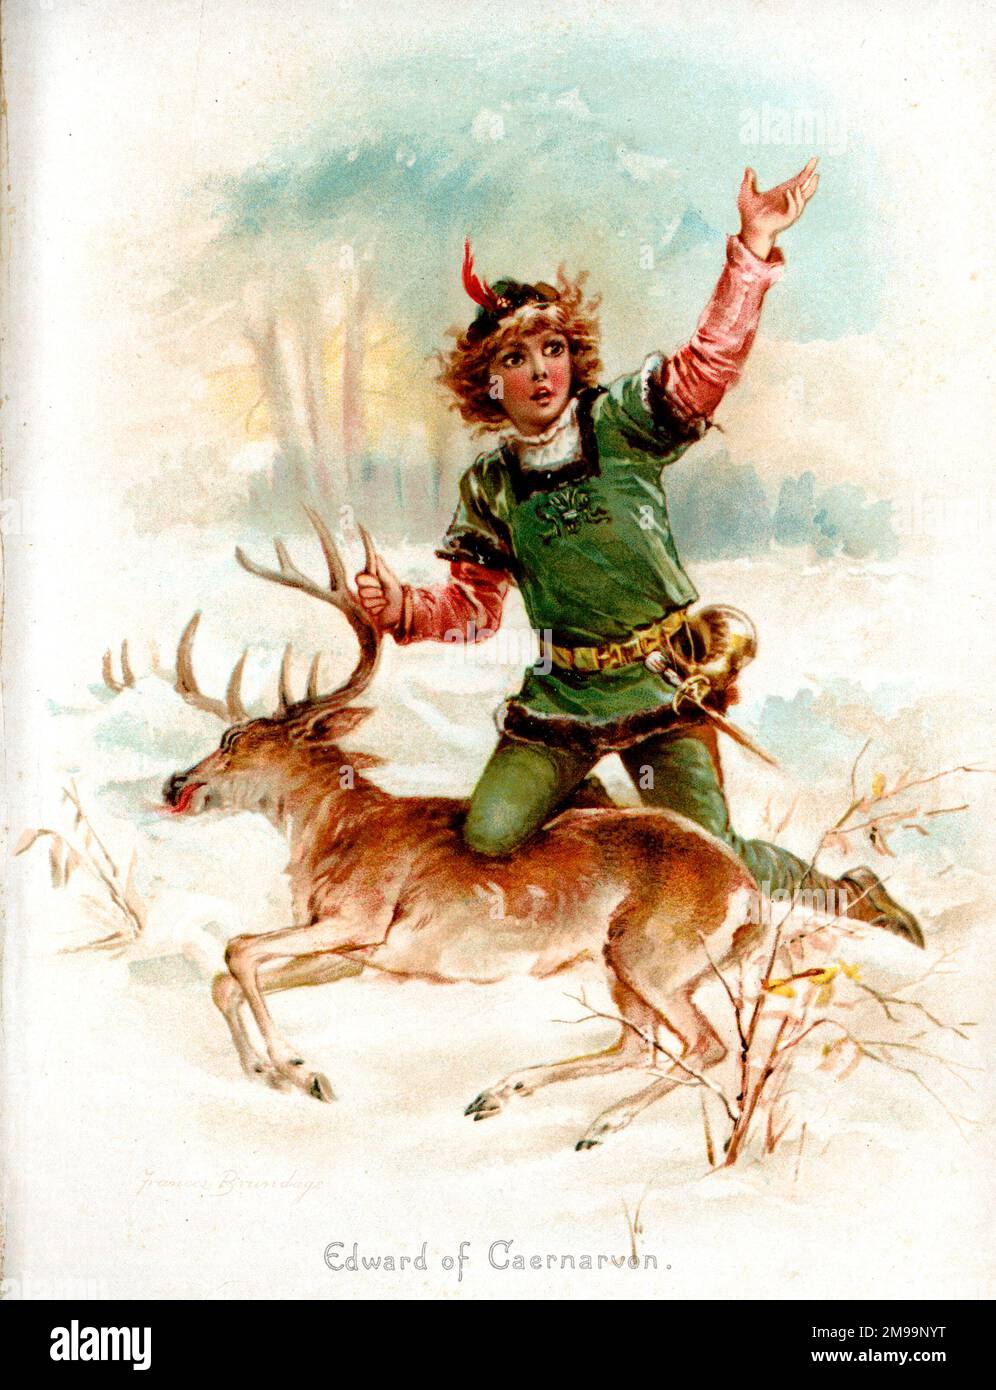 Edward of Caernarvon, later King Edward II of England. Seen here with a fallen stag in the snow. Stock Photo